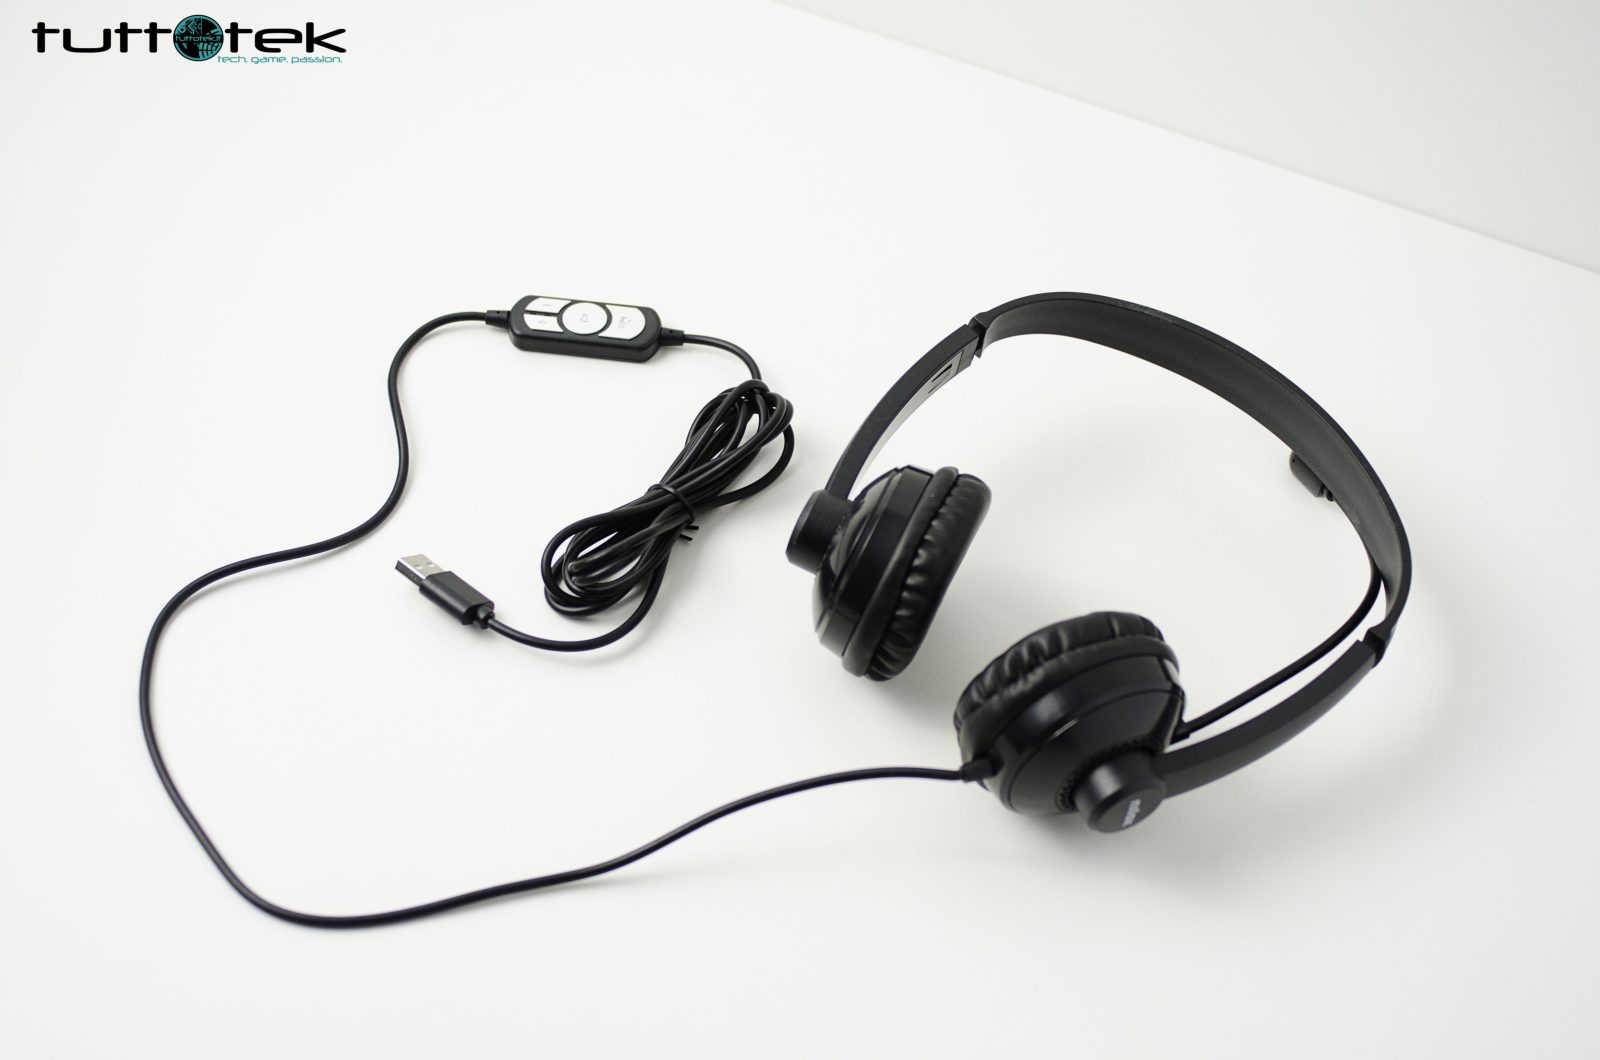 Nilox Multifunction Headphone Review: low price, but ...